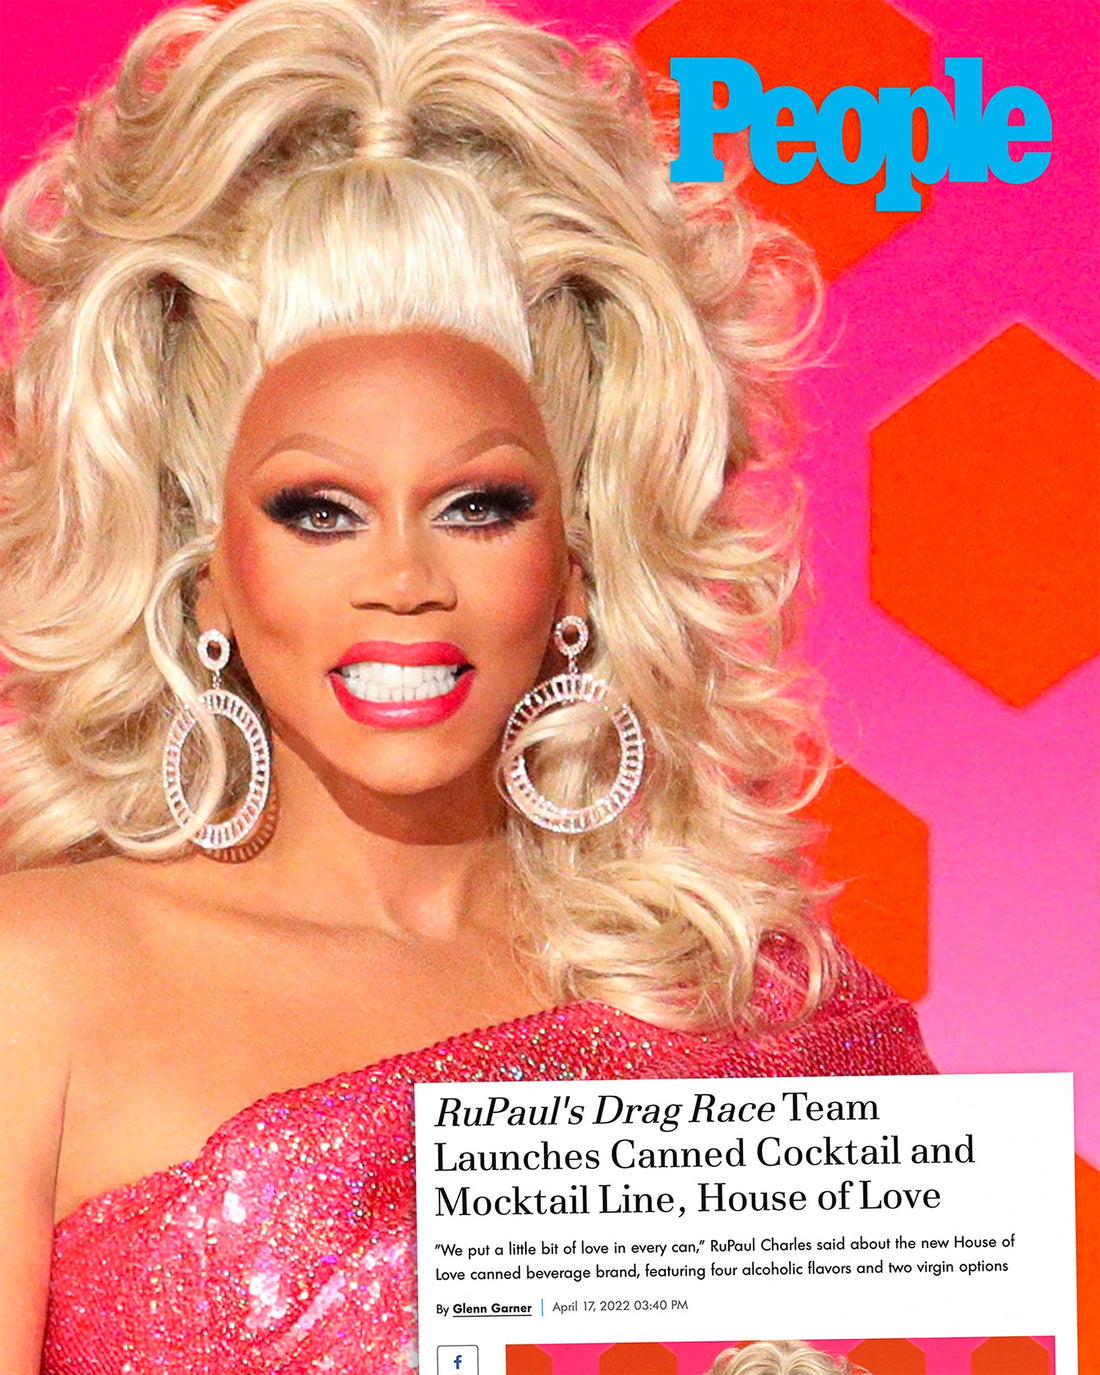 Does RuPaul Have An Alcohol Brand?